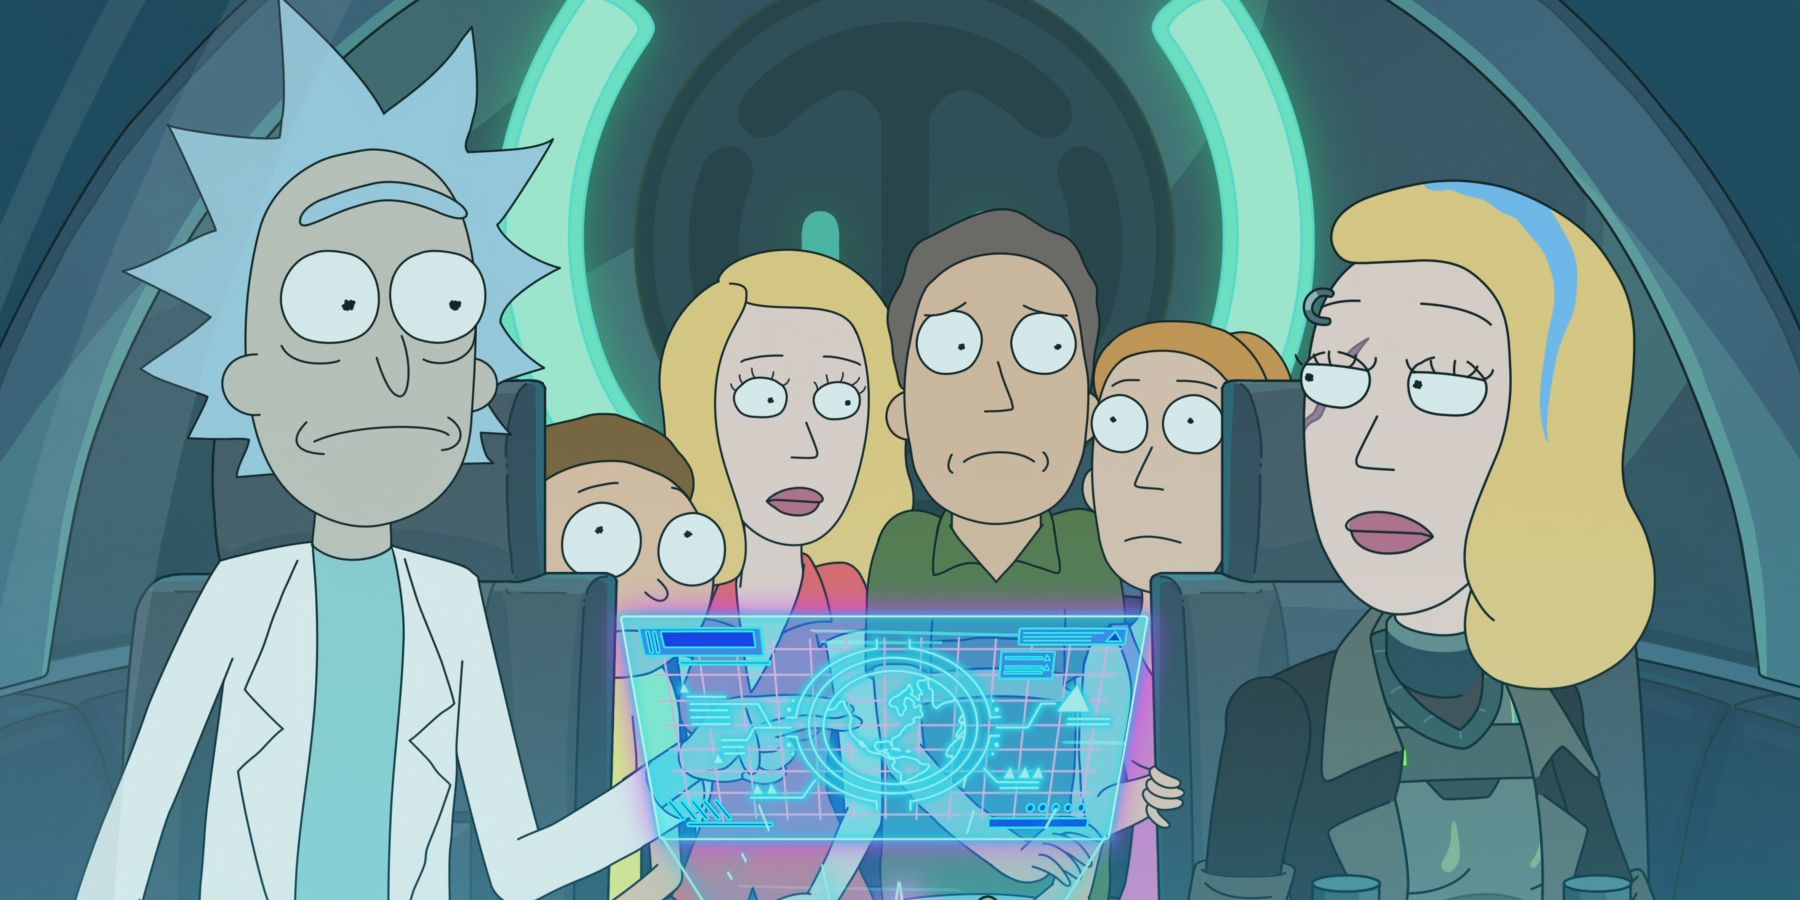 Rick and Morty's blended multiverse family